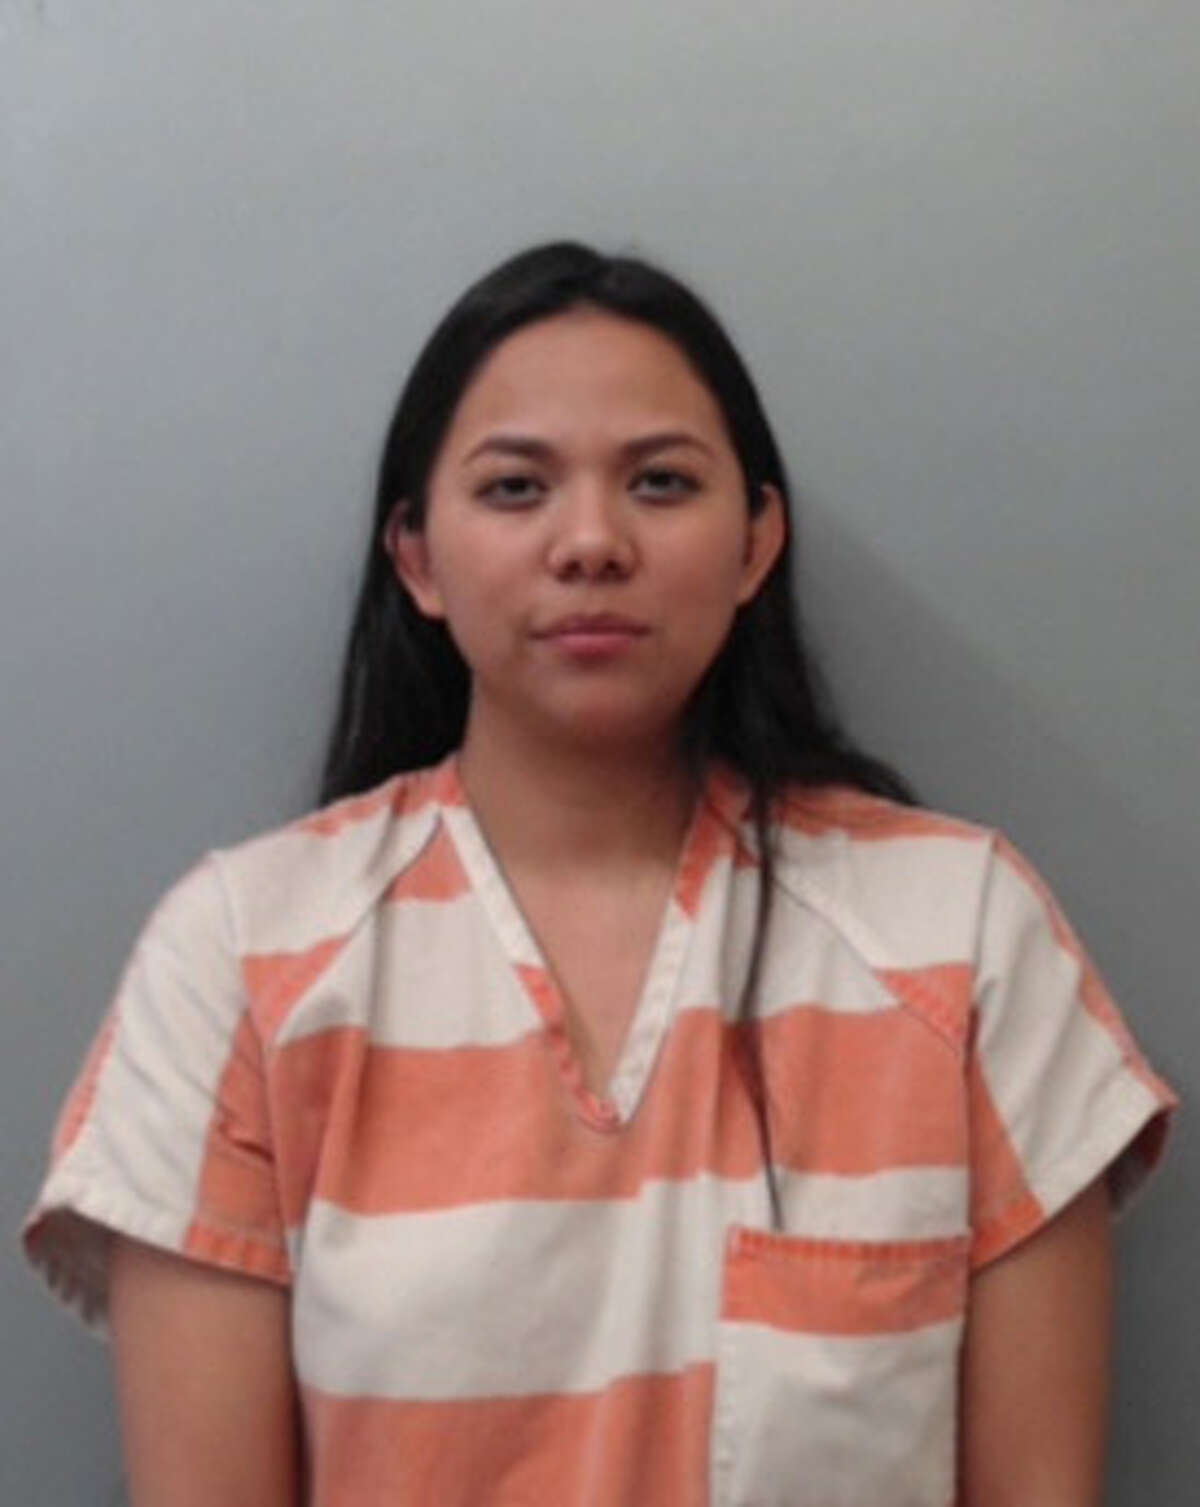 Elizabeth Reyes, 26, was charged with driving while intoxicated with a child younger than 15 years old.